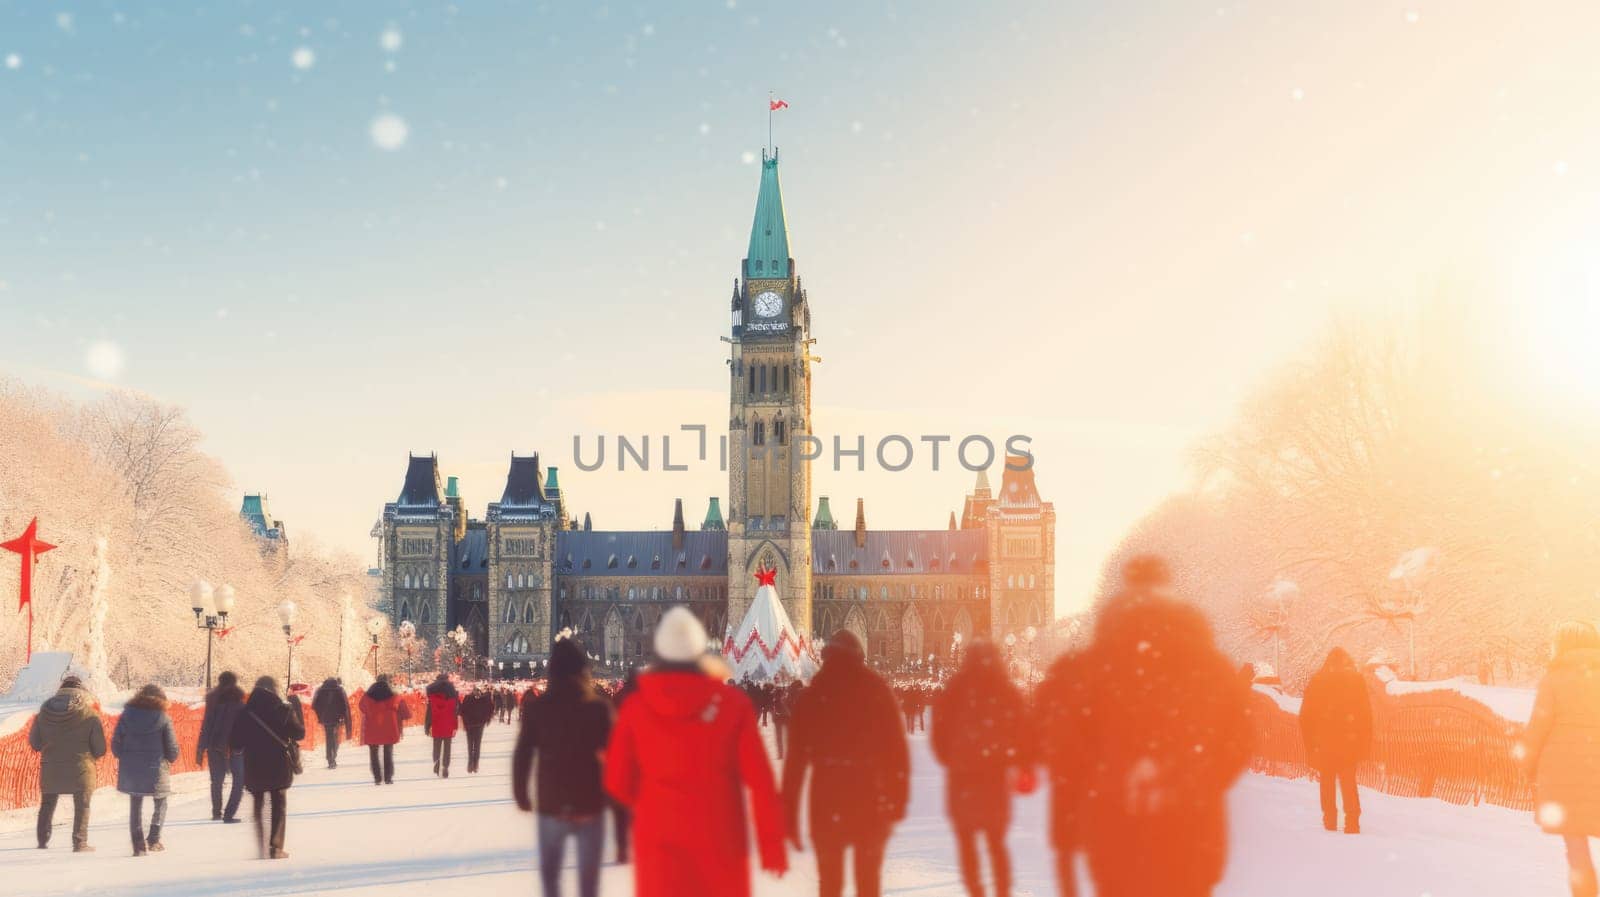 Happy Canadian wearing winter clothes celebrating Christmas holiday at Parliament Hill. People having fun hanging out together walking on city street. Winter holidays and relationship concept by JuliaDorian